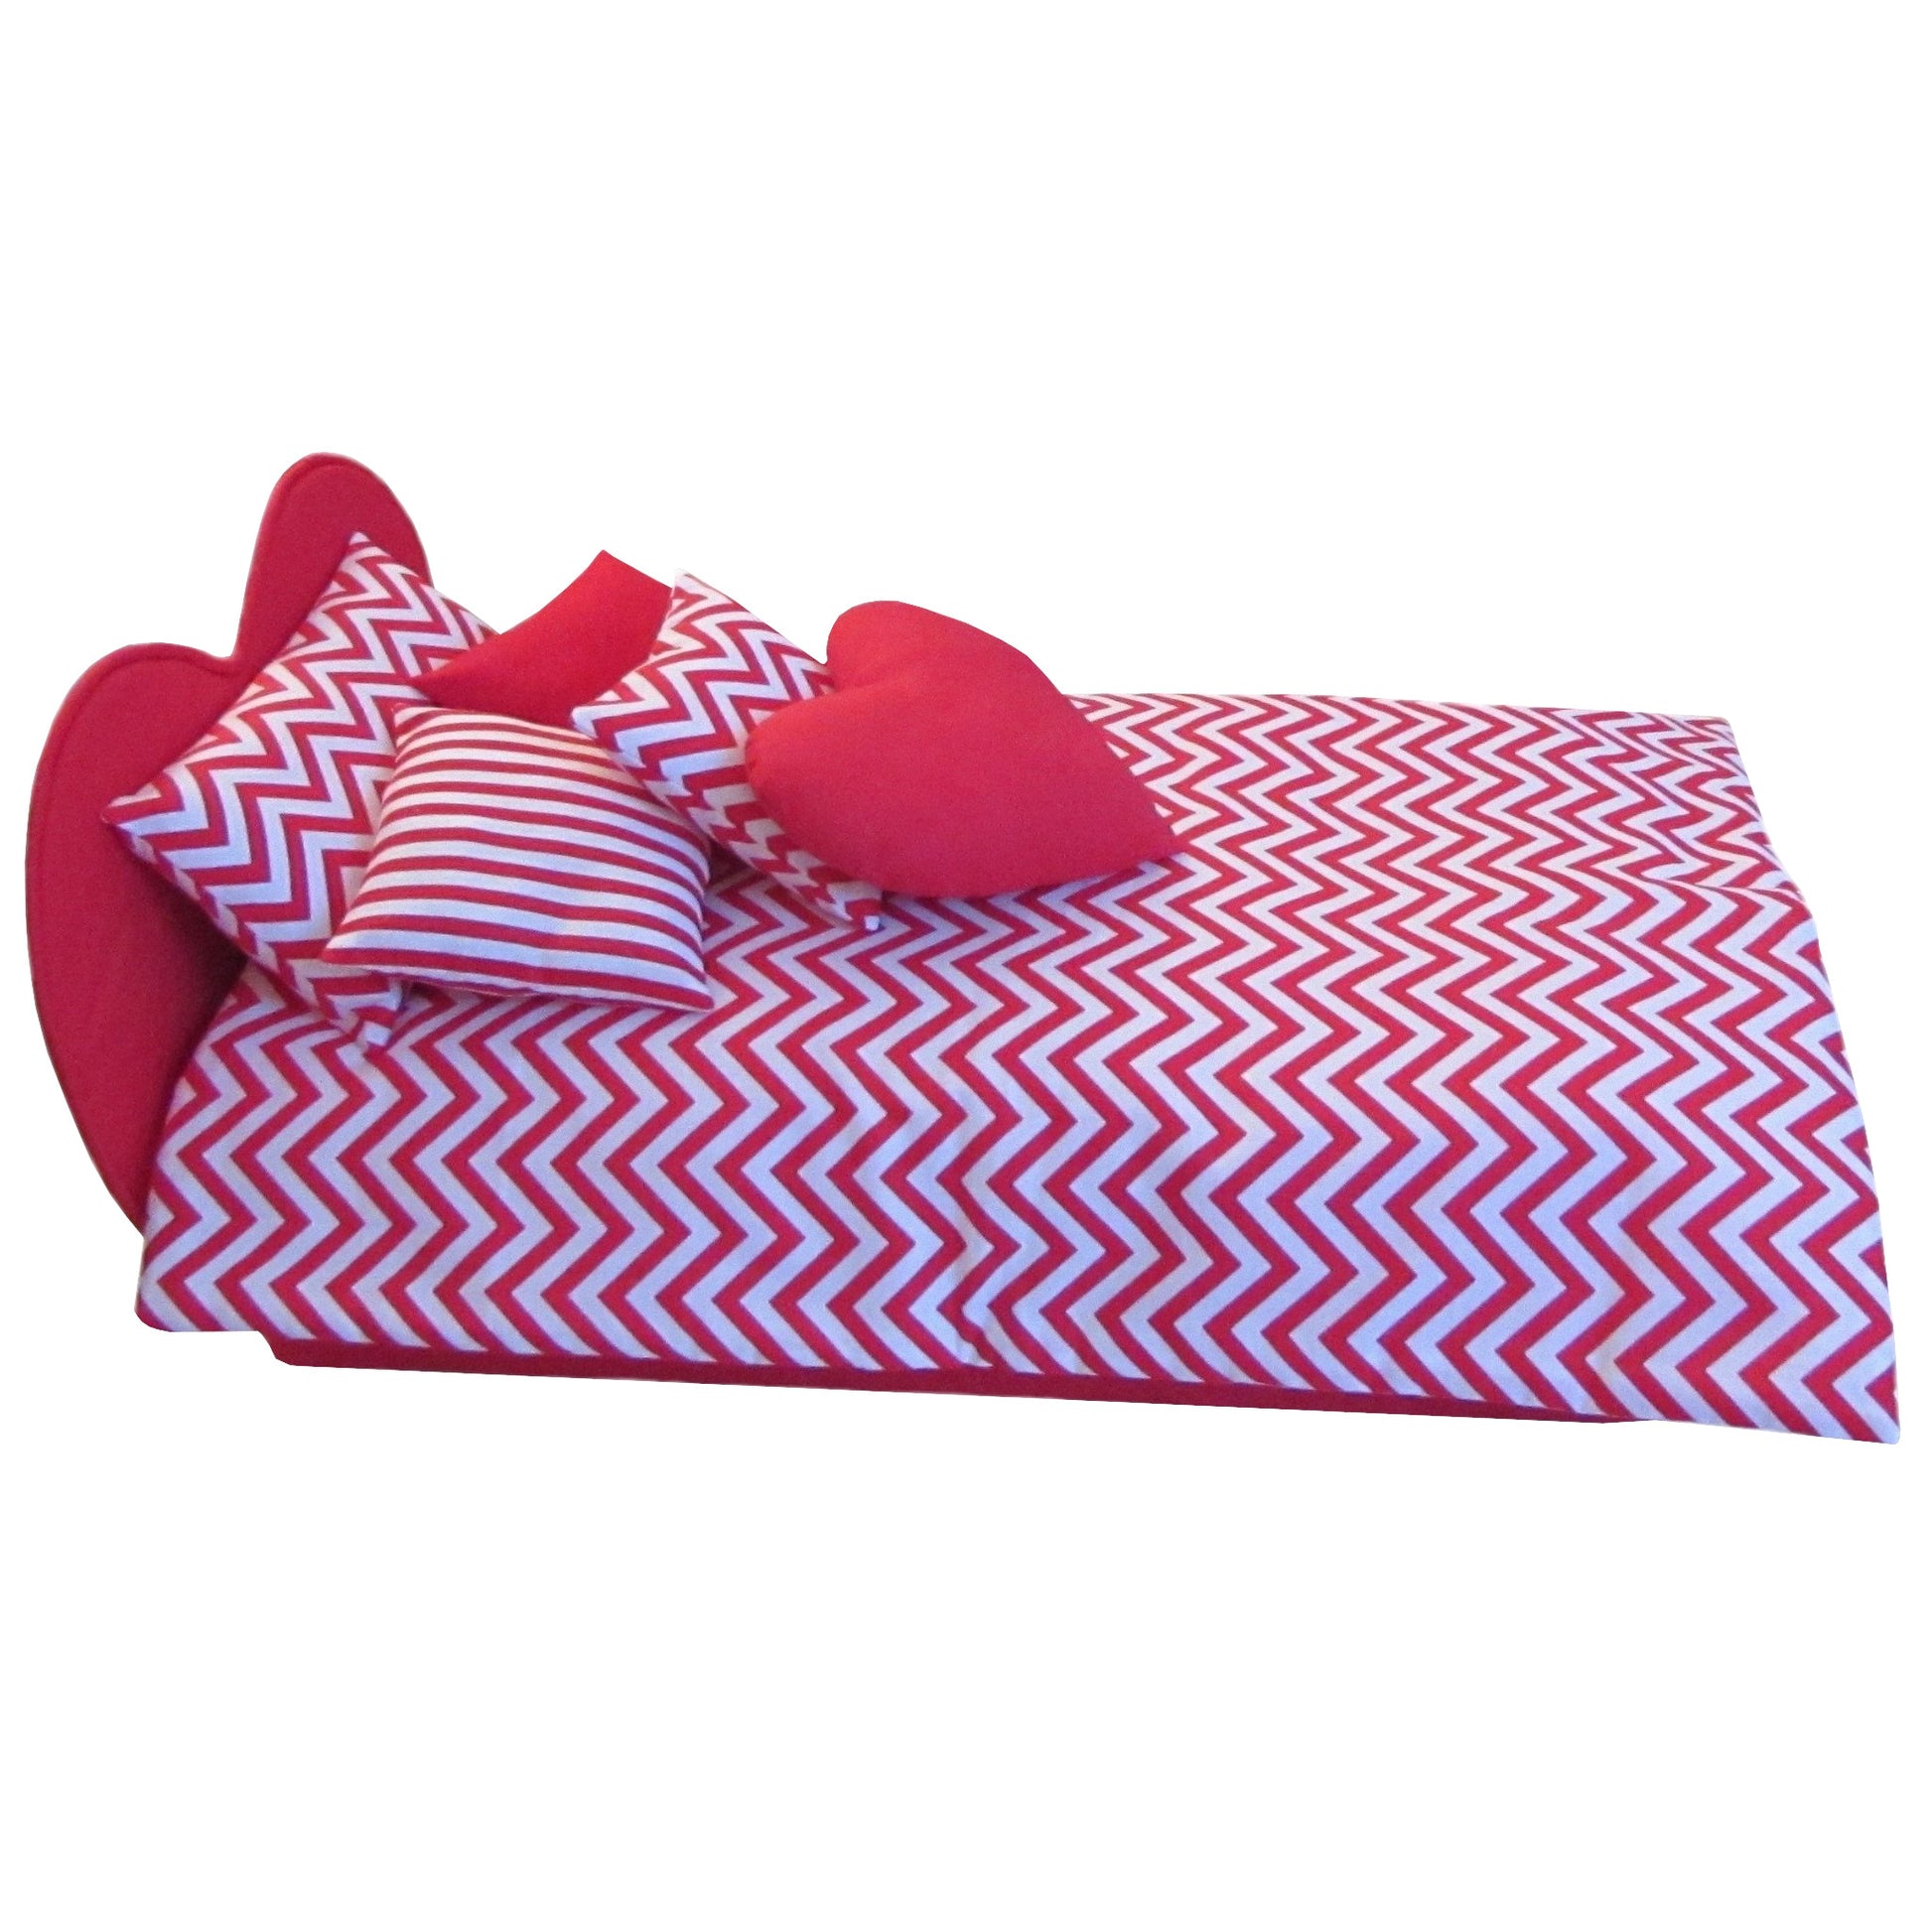 Red and White Chevron Doll Comforter Set and Red Heart Upholstered Doll Bed for 18-inch dolls